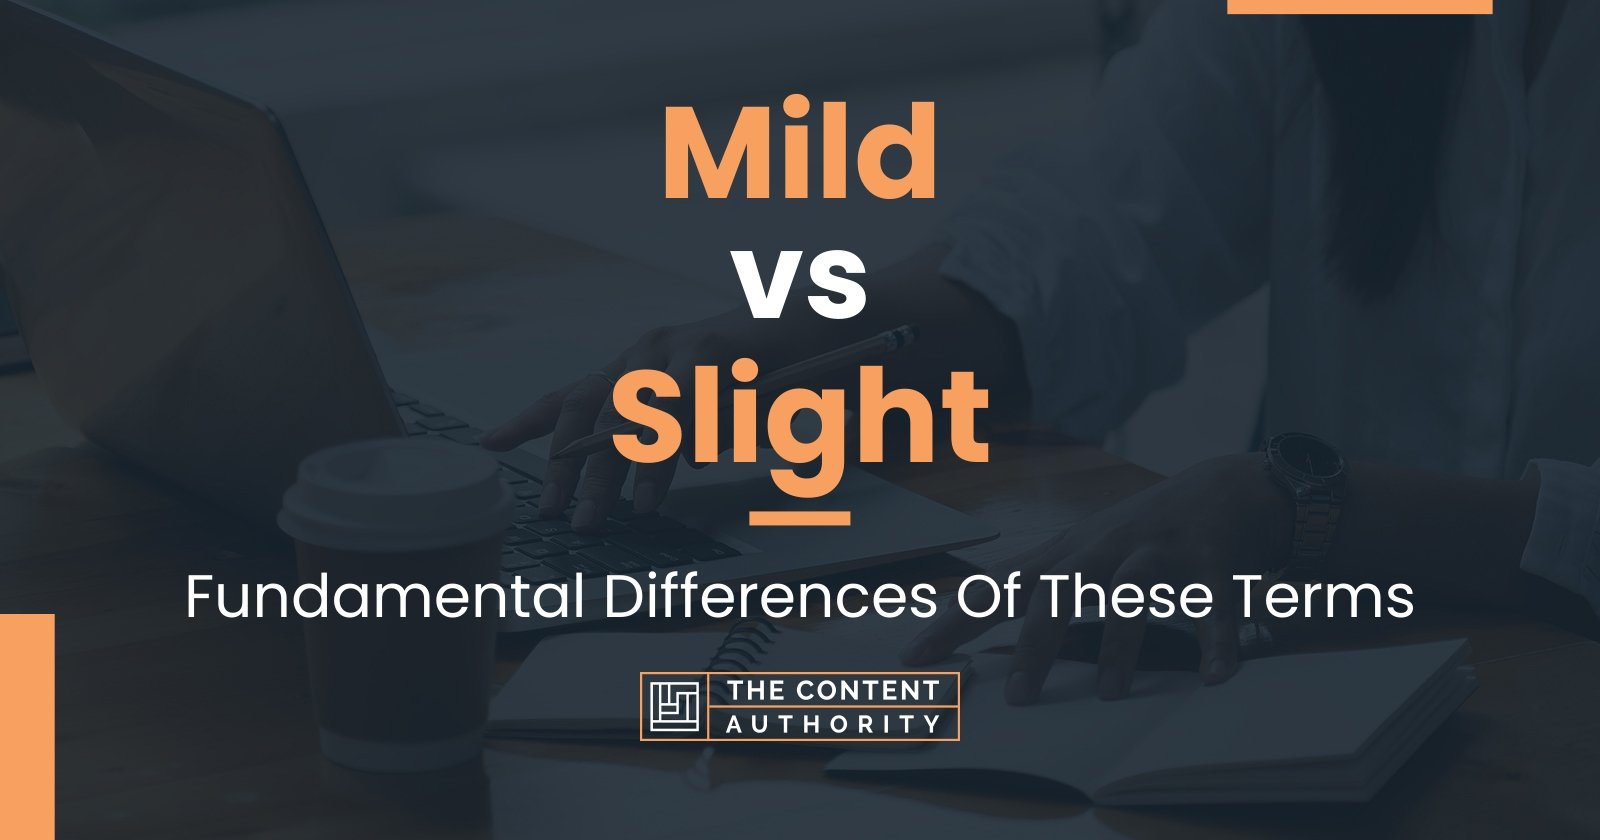 Mild vs Slight: Fundamental Differences Of These Terms